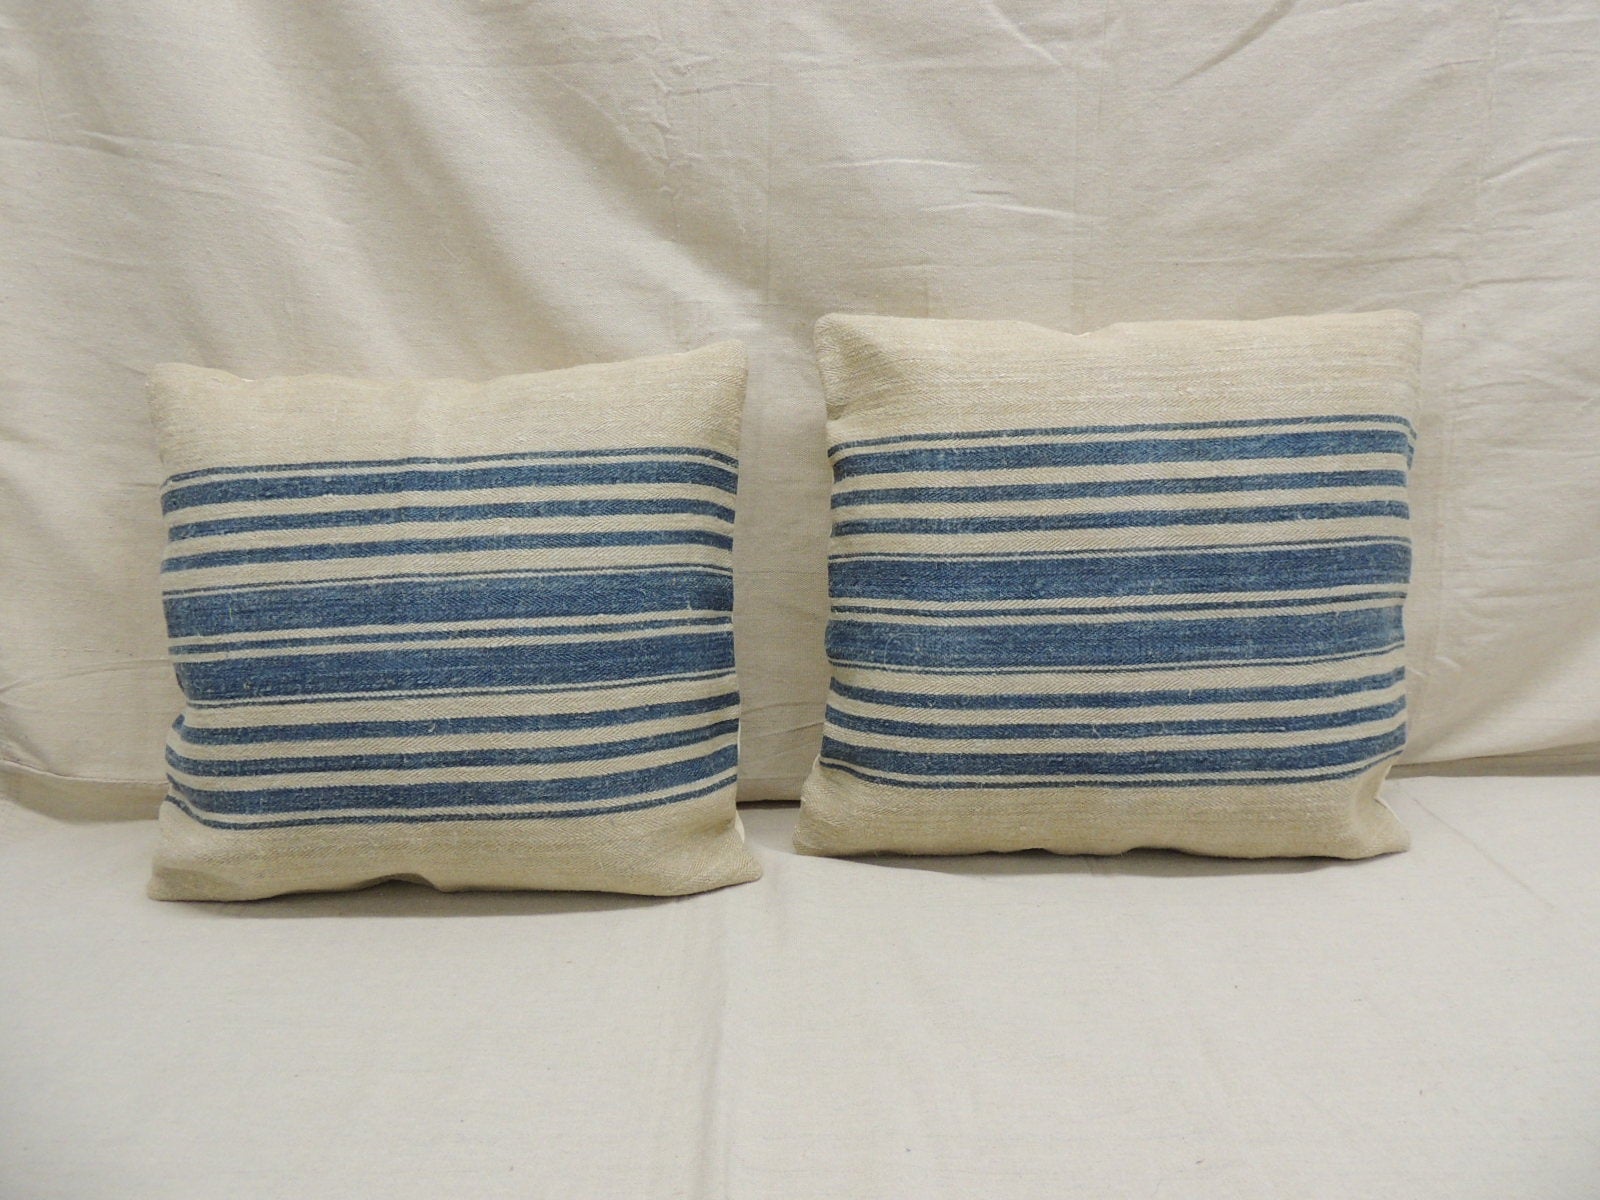 Pair of blue and stone French grain sack decorative square pillows.
Decorative pillow designed and handcrafted in the USA.
Feather / down custom made pillow insert. Handstitched closure.
Size: 18